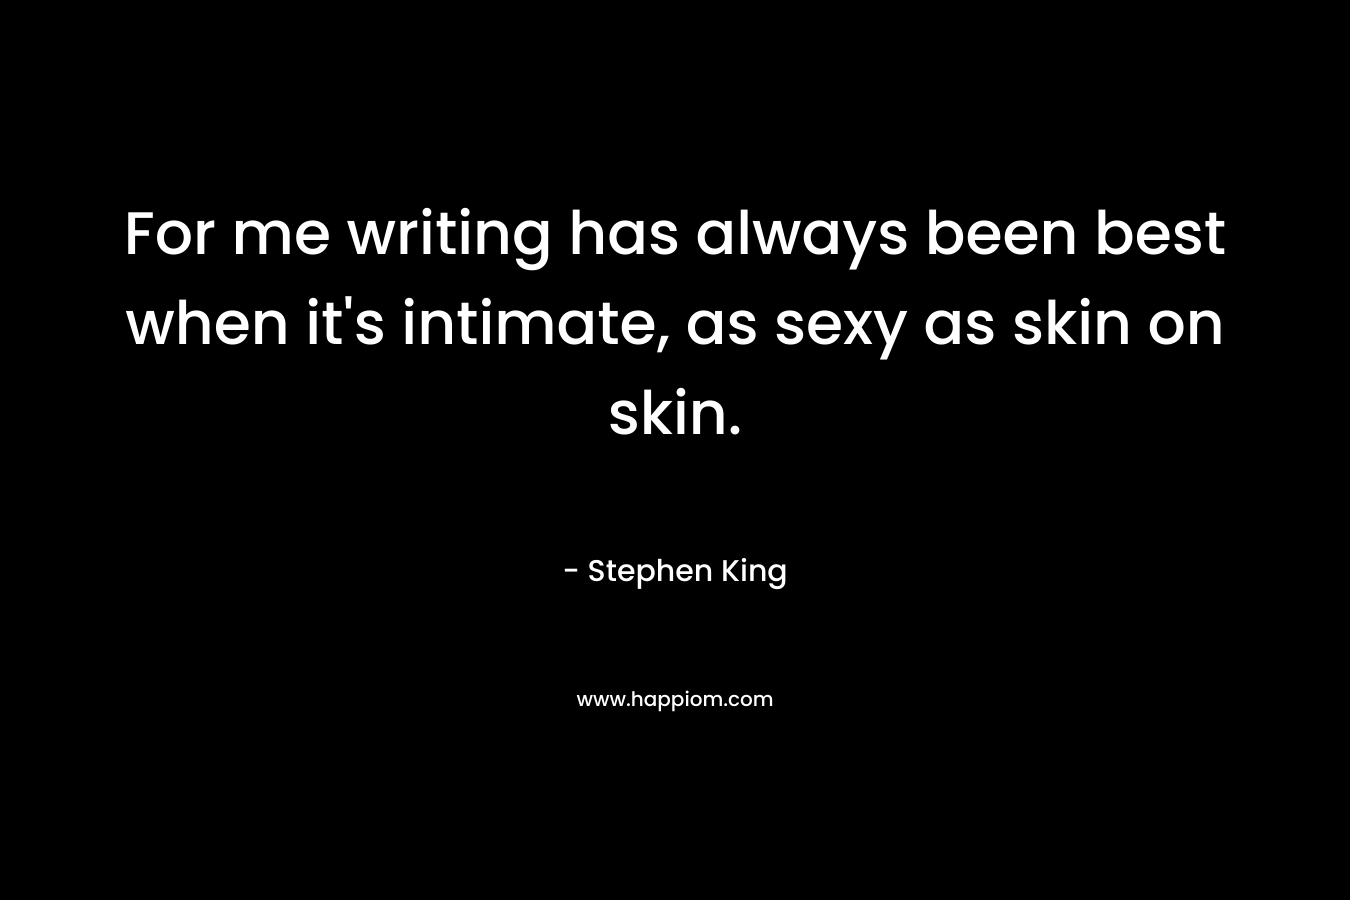 For me writing has always been best when it’s intimate, as sexy as skin on skin. – Stephen King